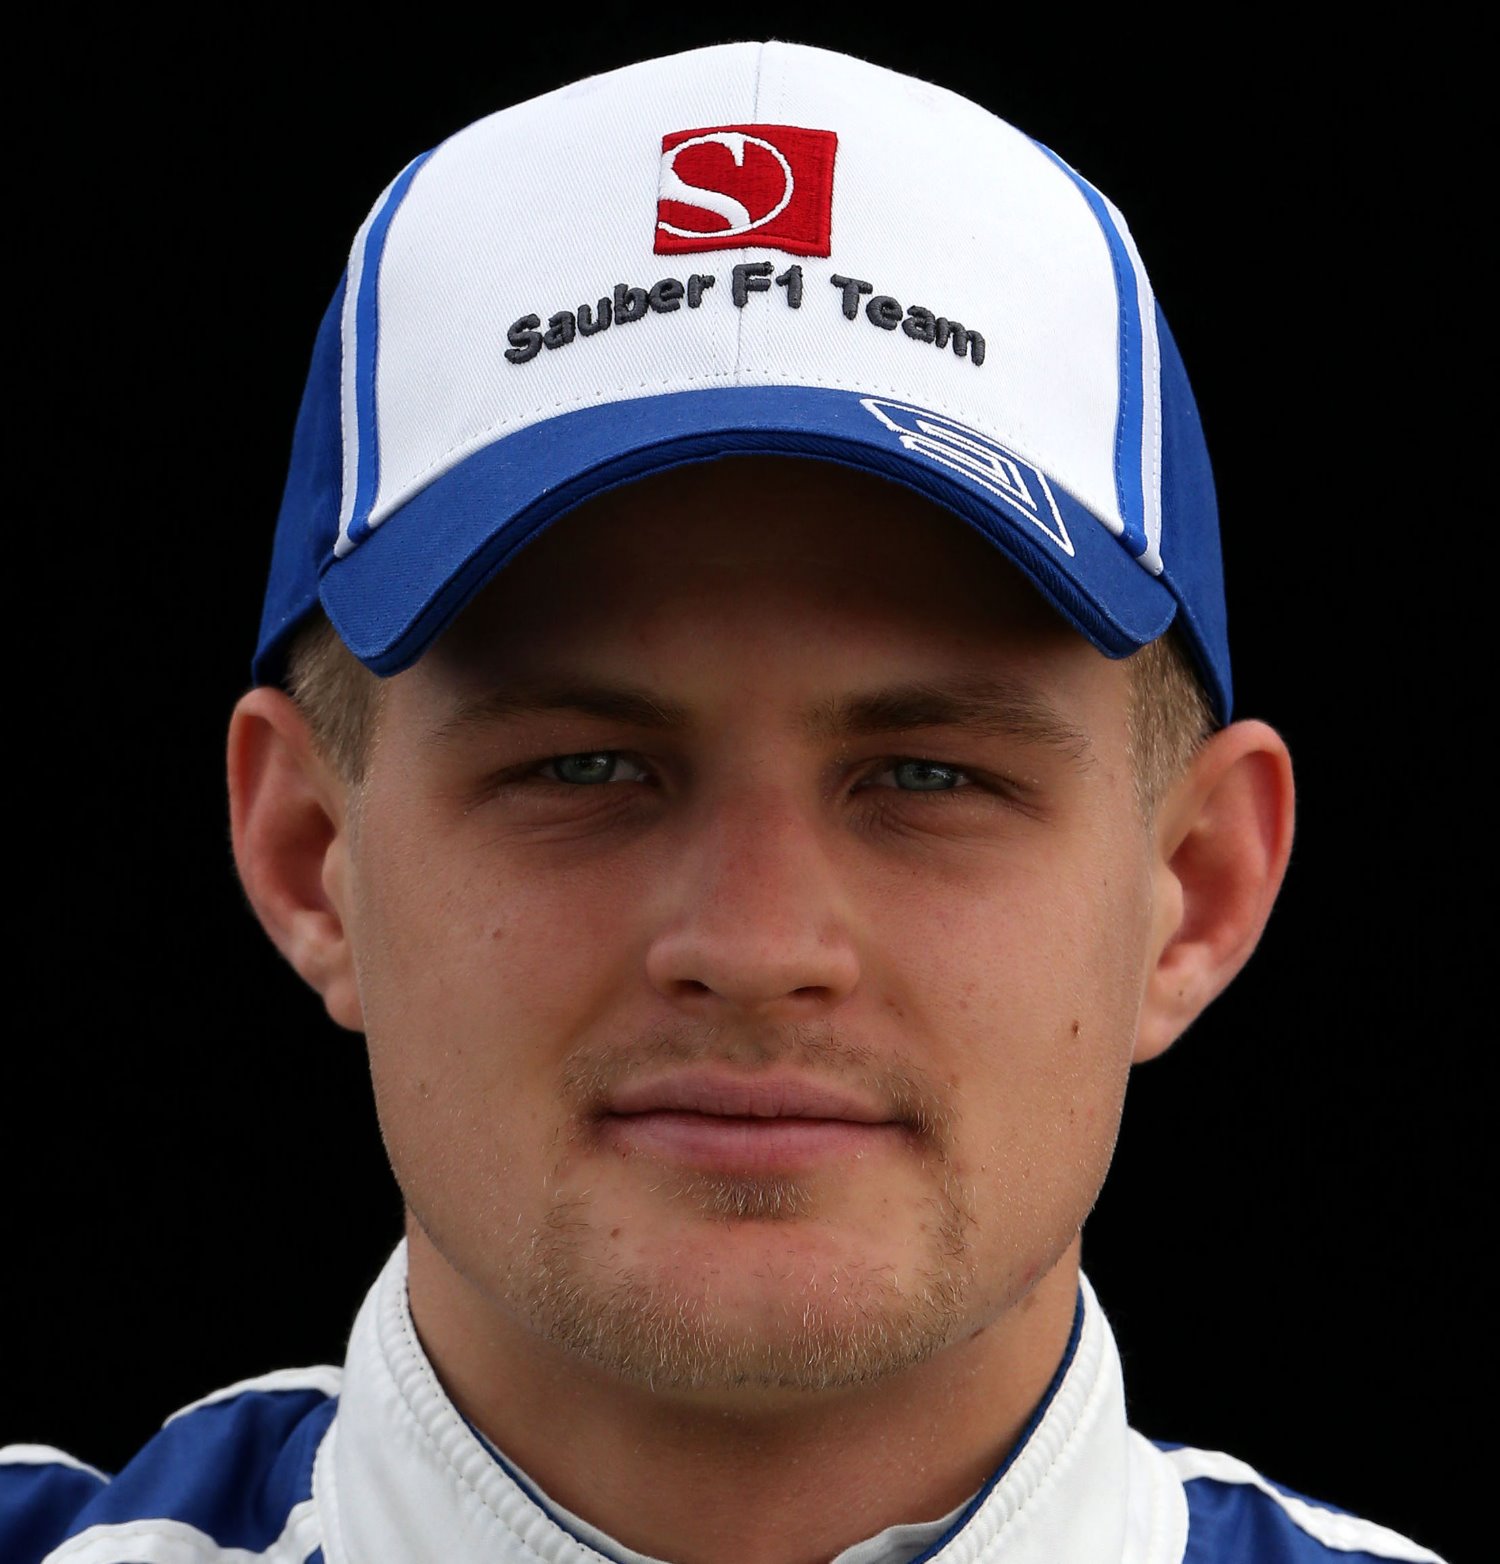 Marcus Ericsson thinks he is simply better than Nasr